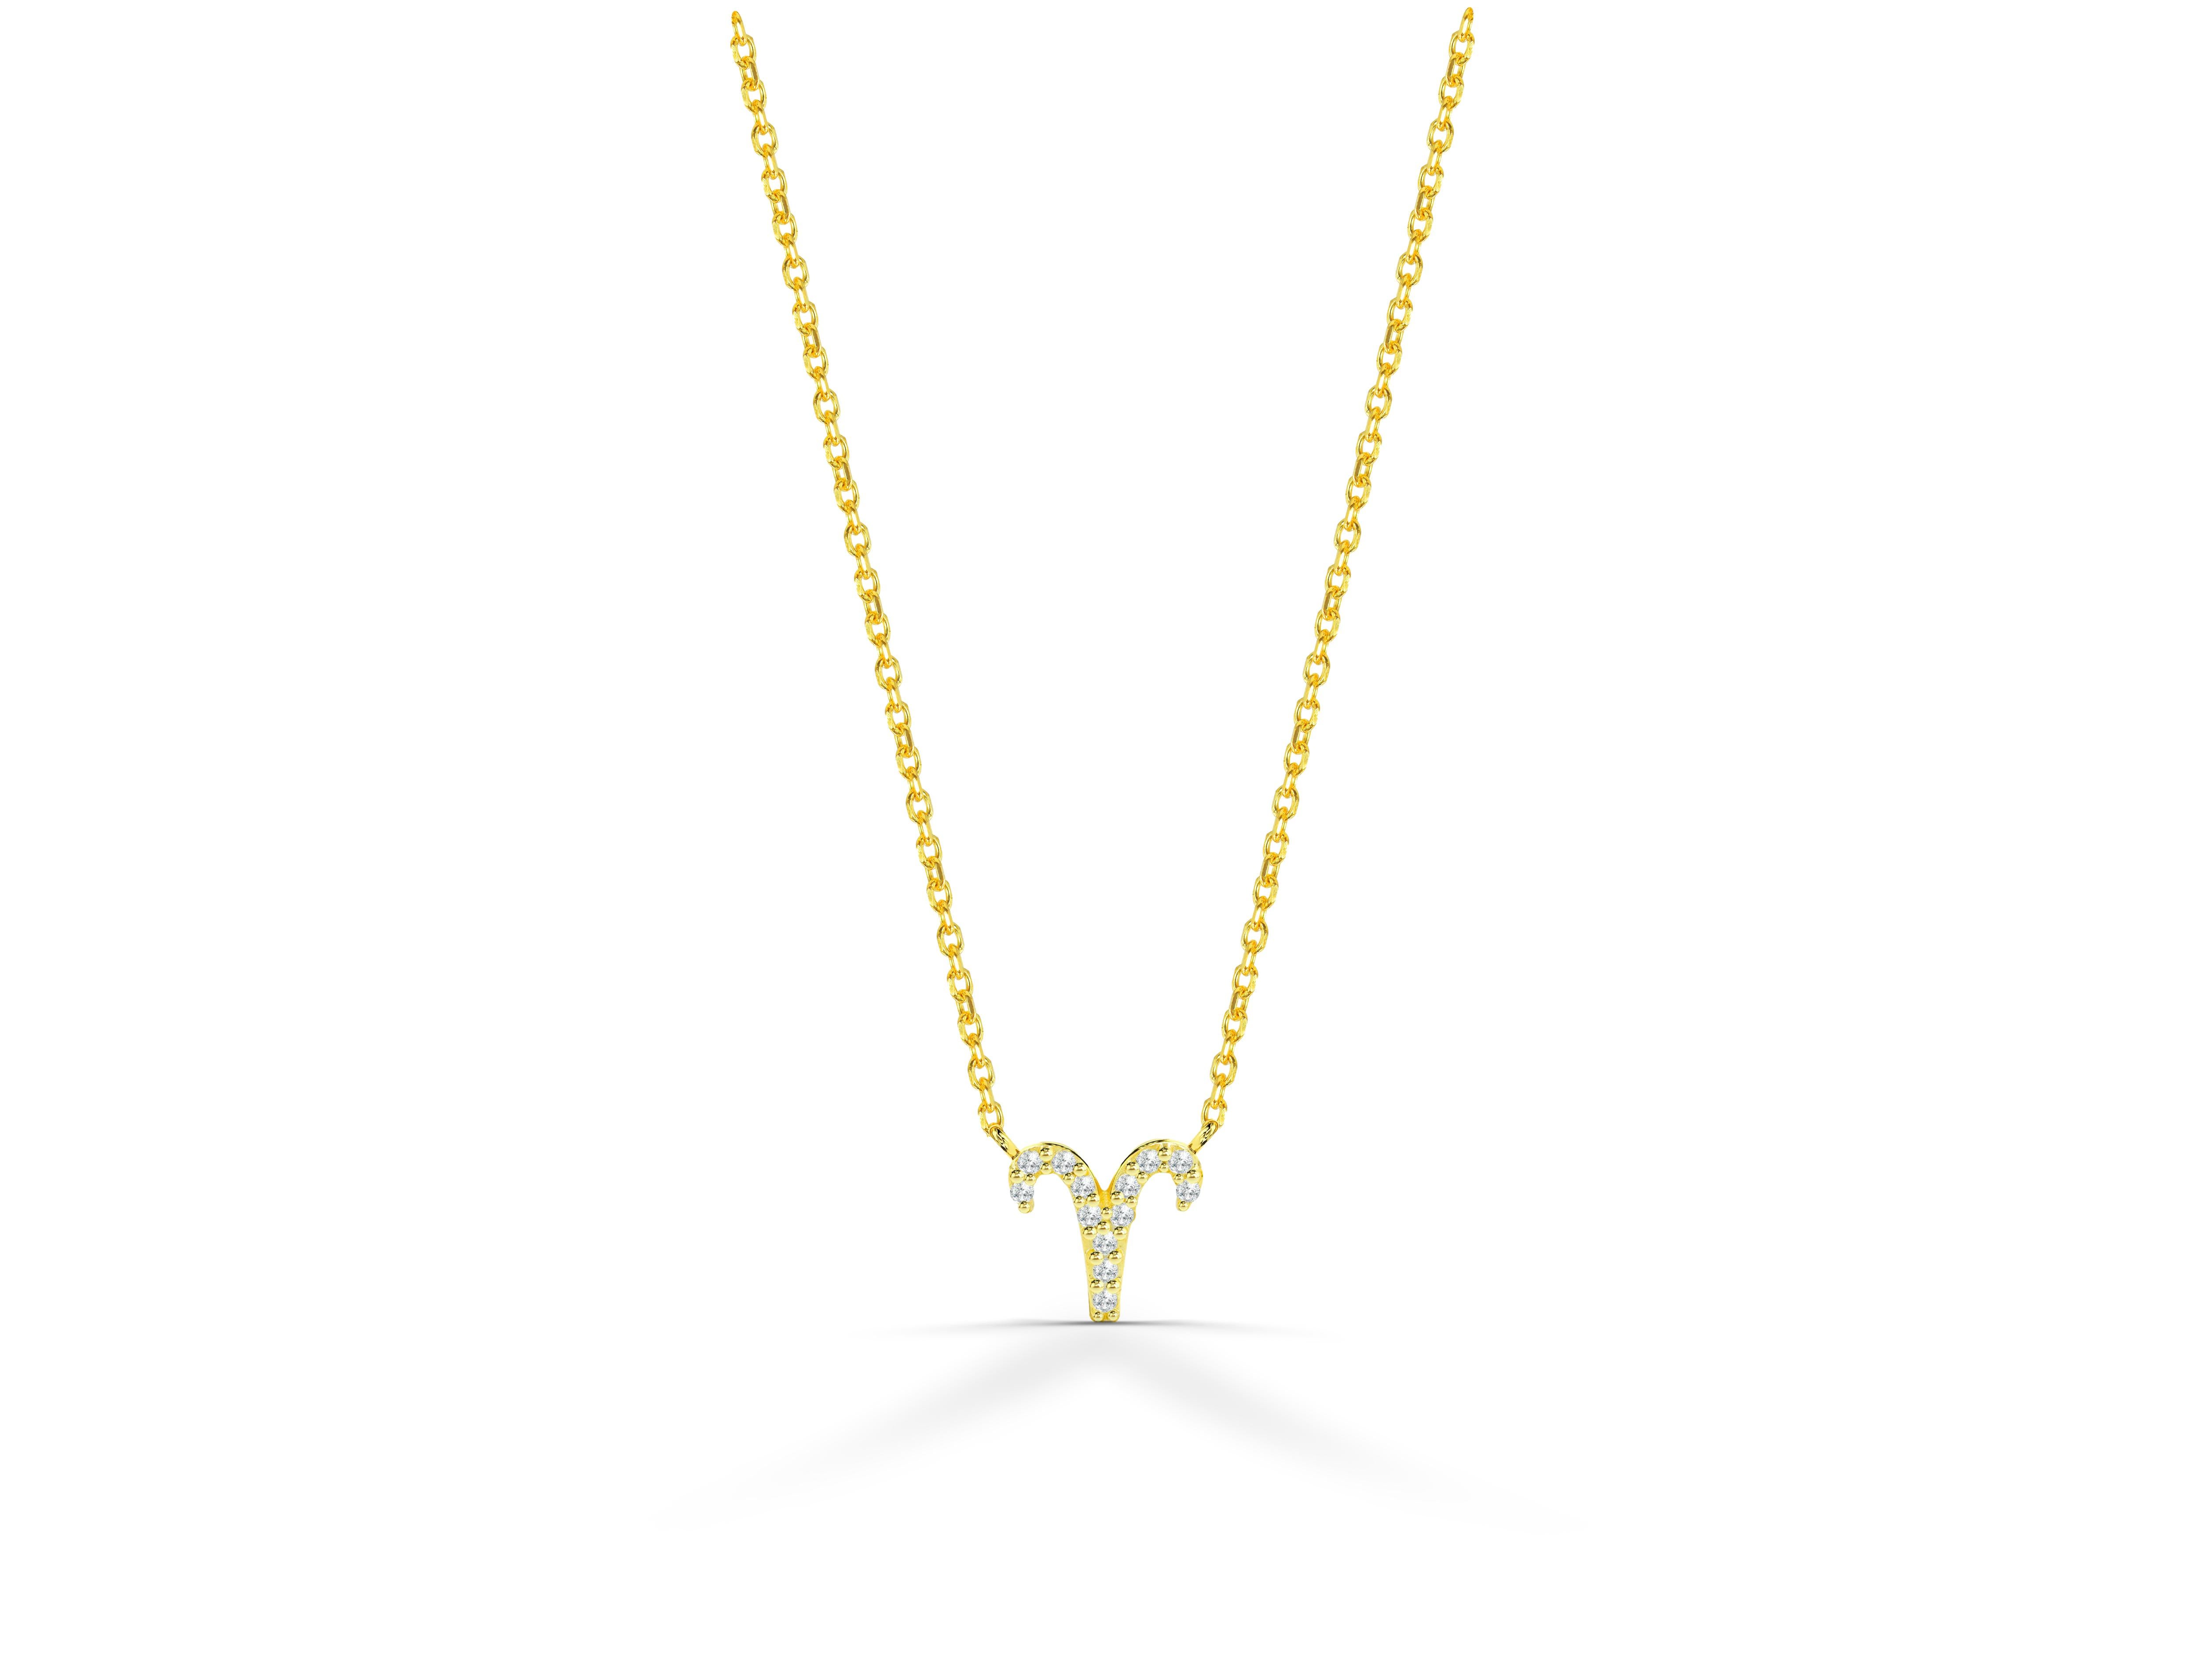 Beautiful and Sparkly Diamond Aries Necklace is made of 14k solid gold.
Available in three colors of gold:  Yellow Gold / Rose Gold / White Gold.

Natural genuine round cut diamond each diamond is hand selected by me to ensure quality and set by a